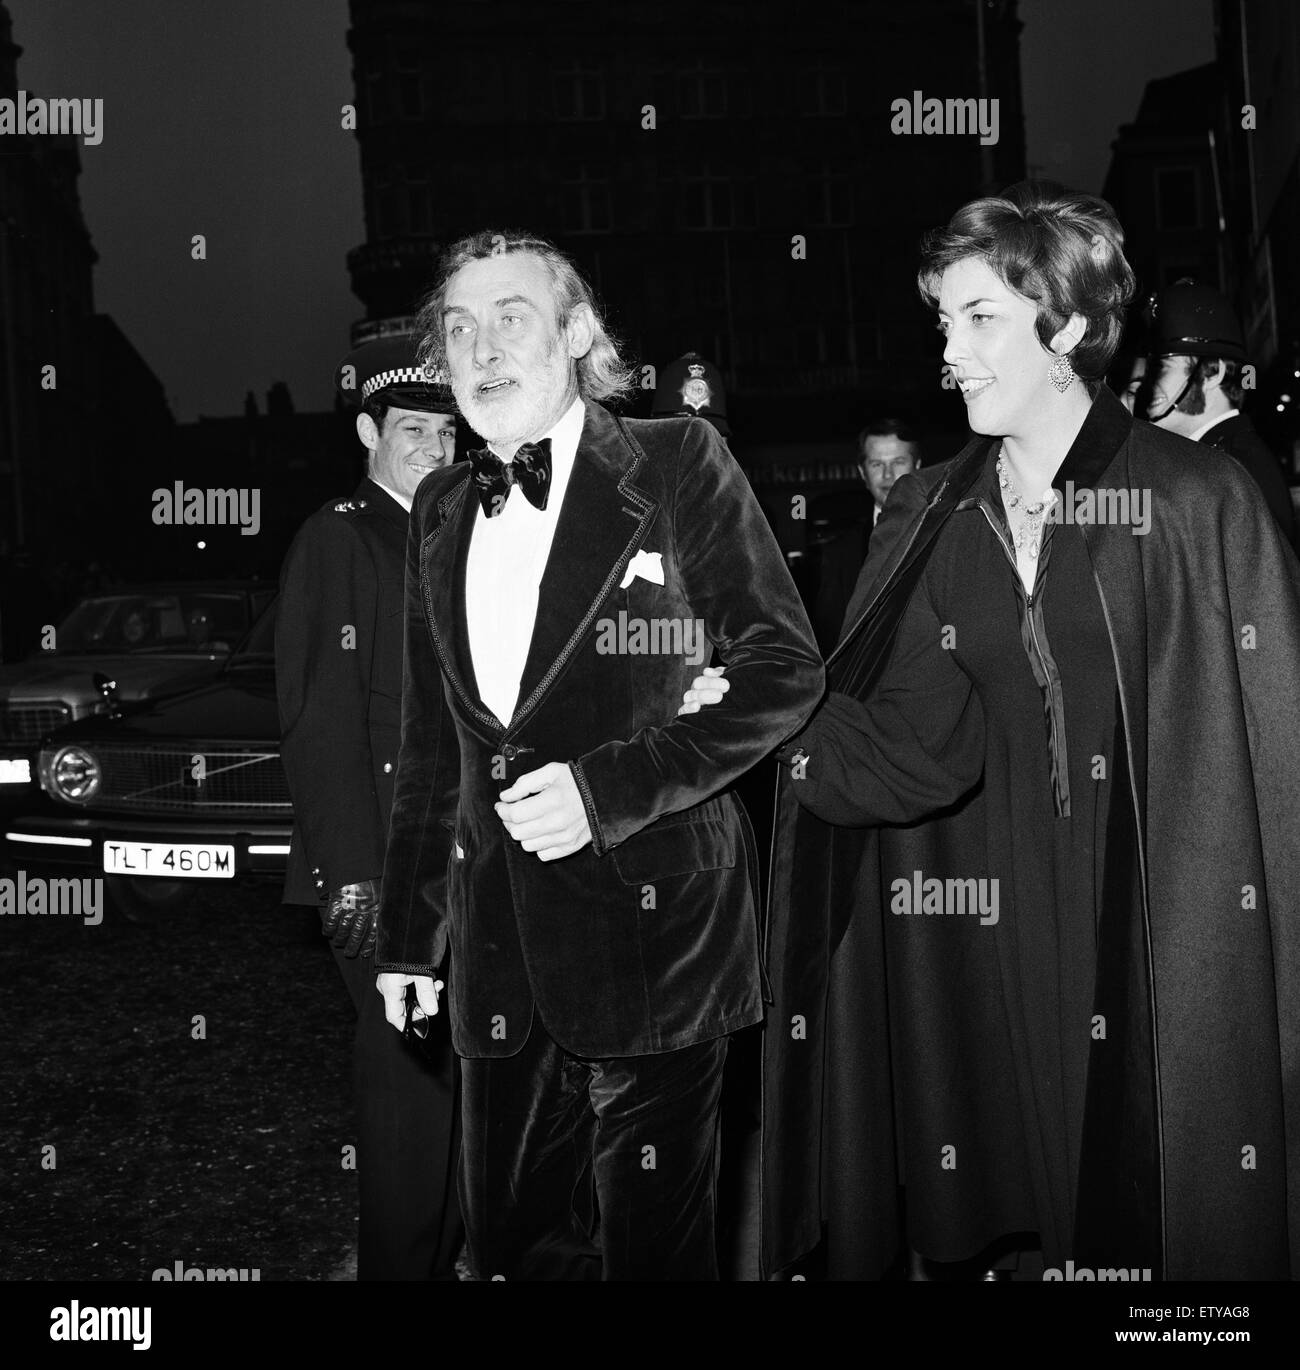 The Royal Film Performance of 'The Three musketeers' at the Odeon Leicester Square, London. Spike Milligan with his wife Paddy Milligan. 25th March 1974. Stock Photo